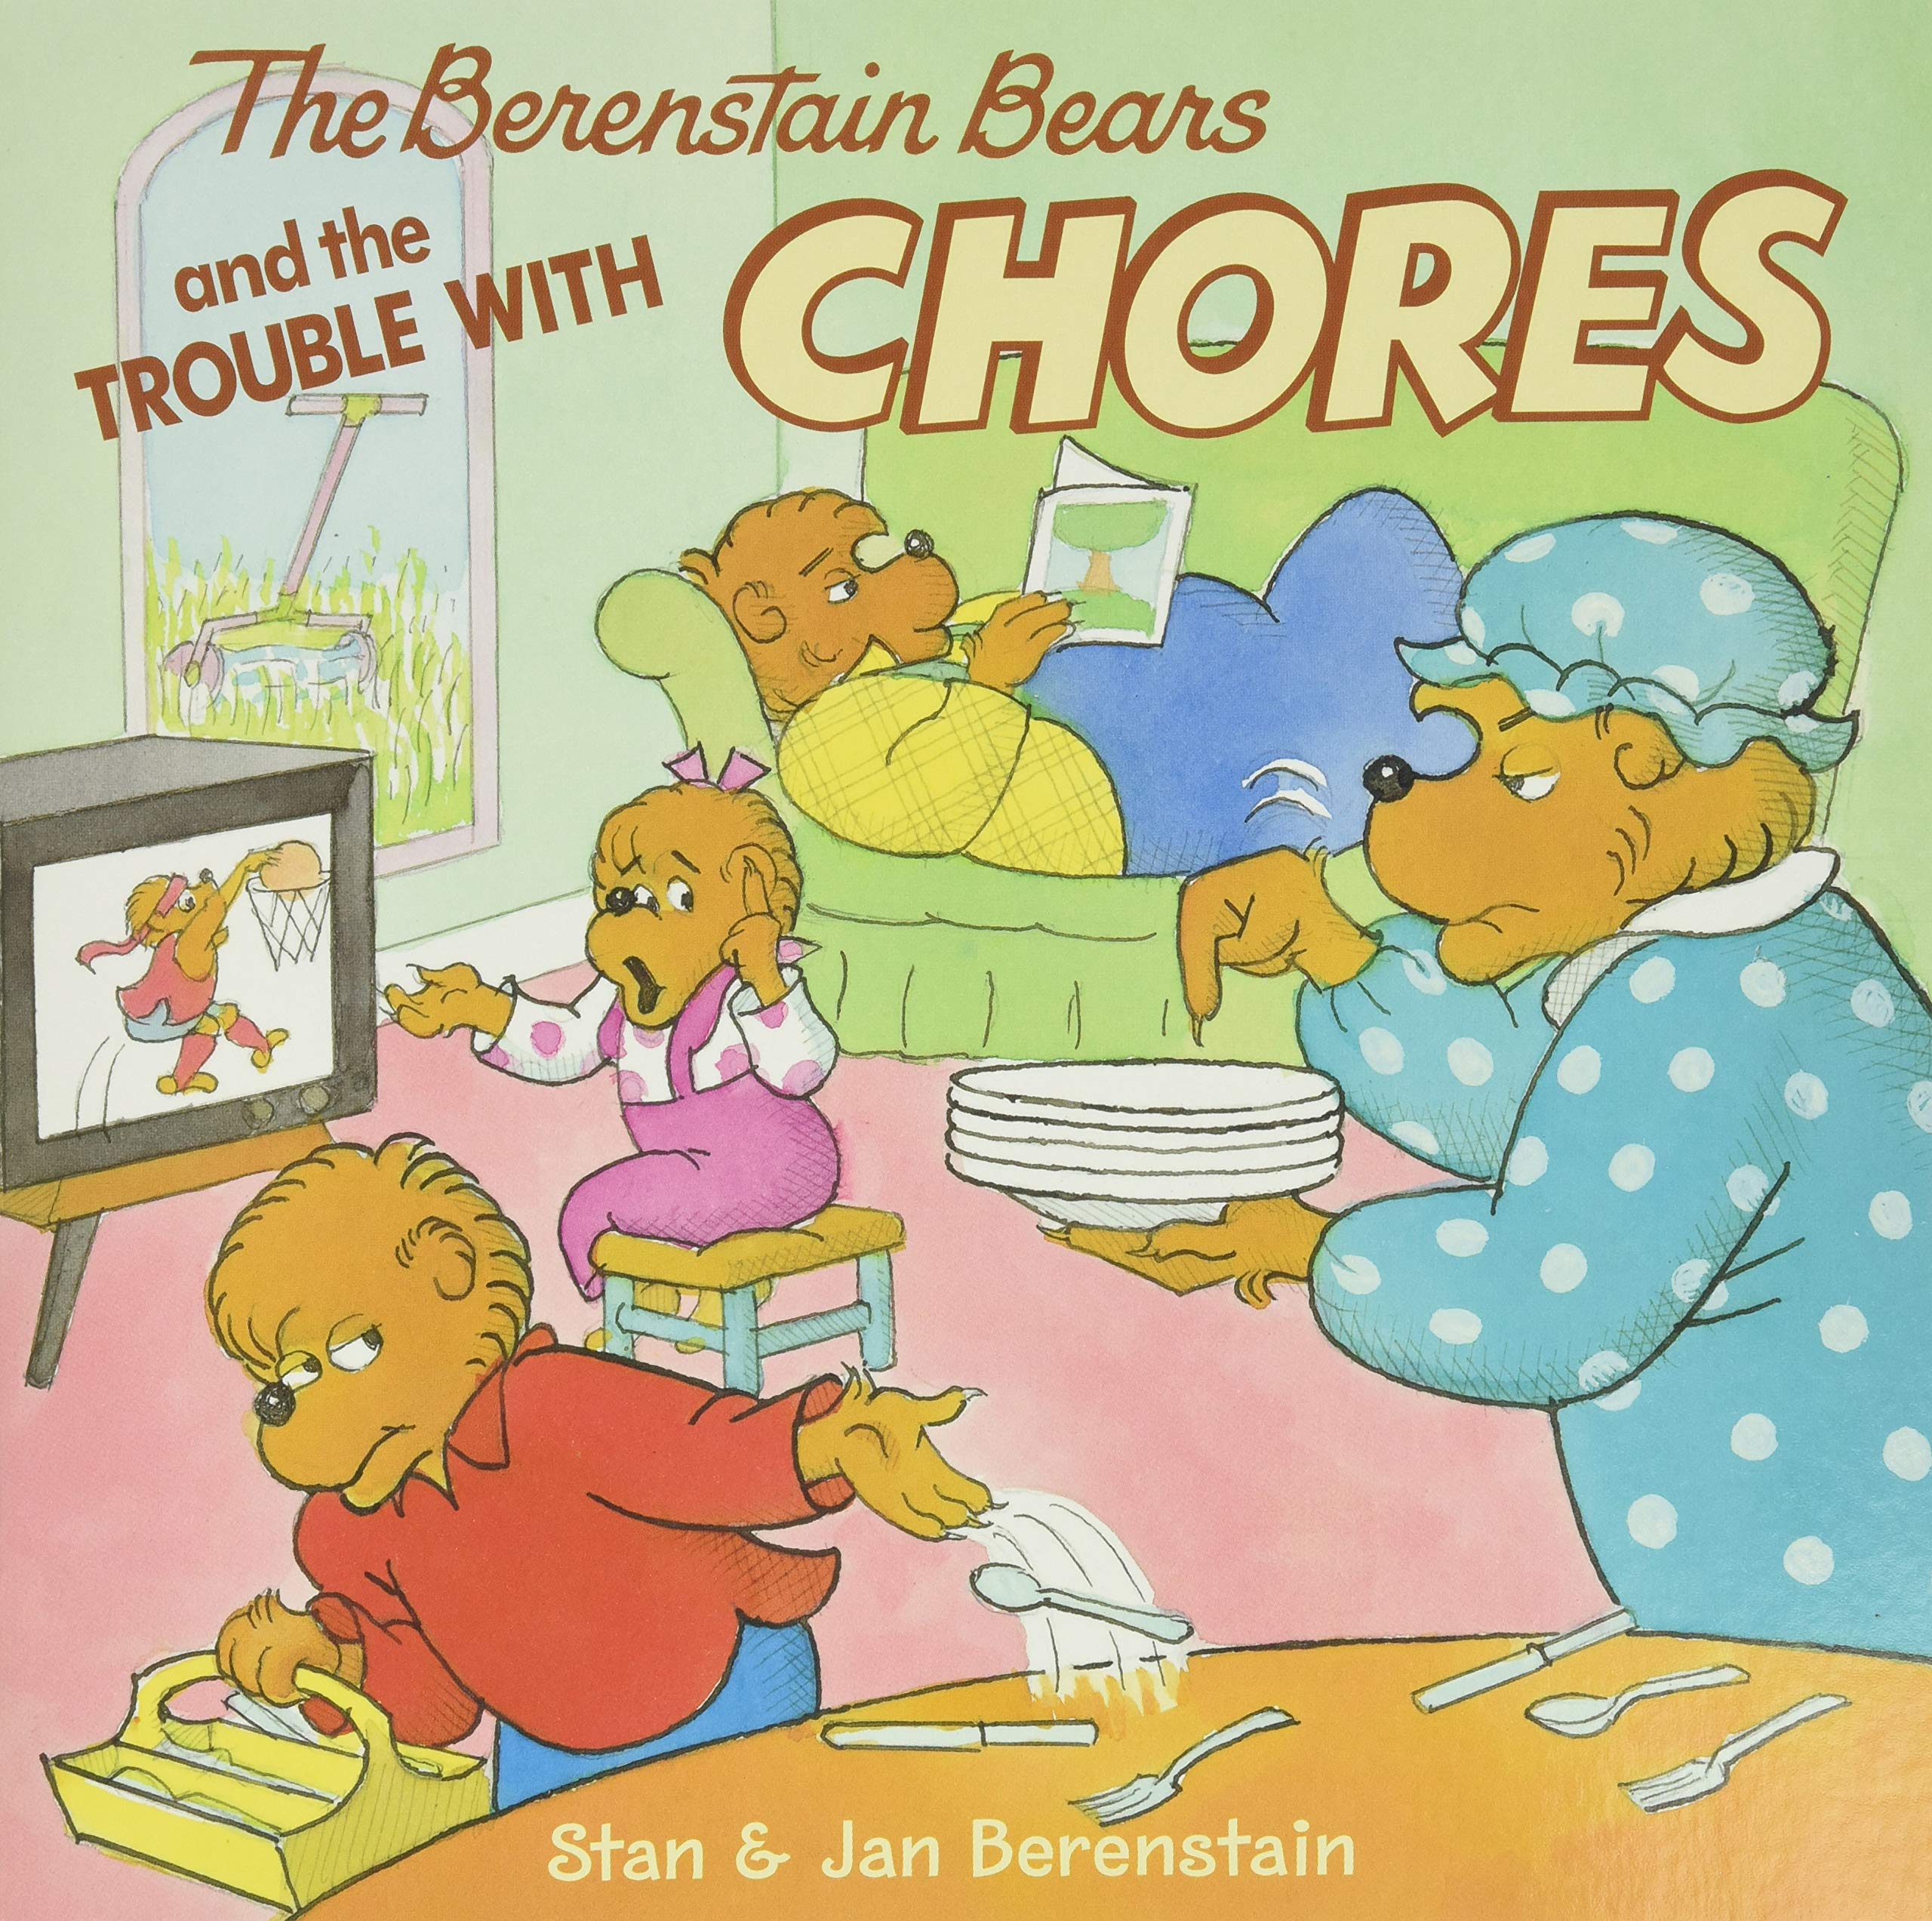 The Berenstain Bears and the trouble with chores